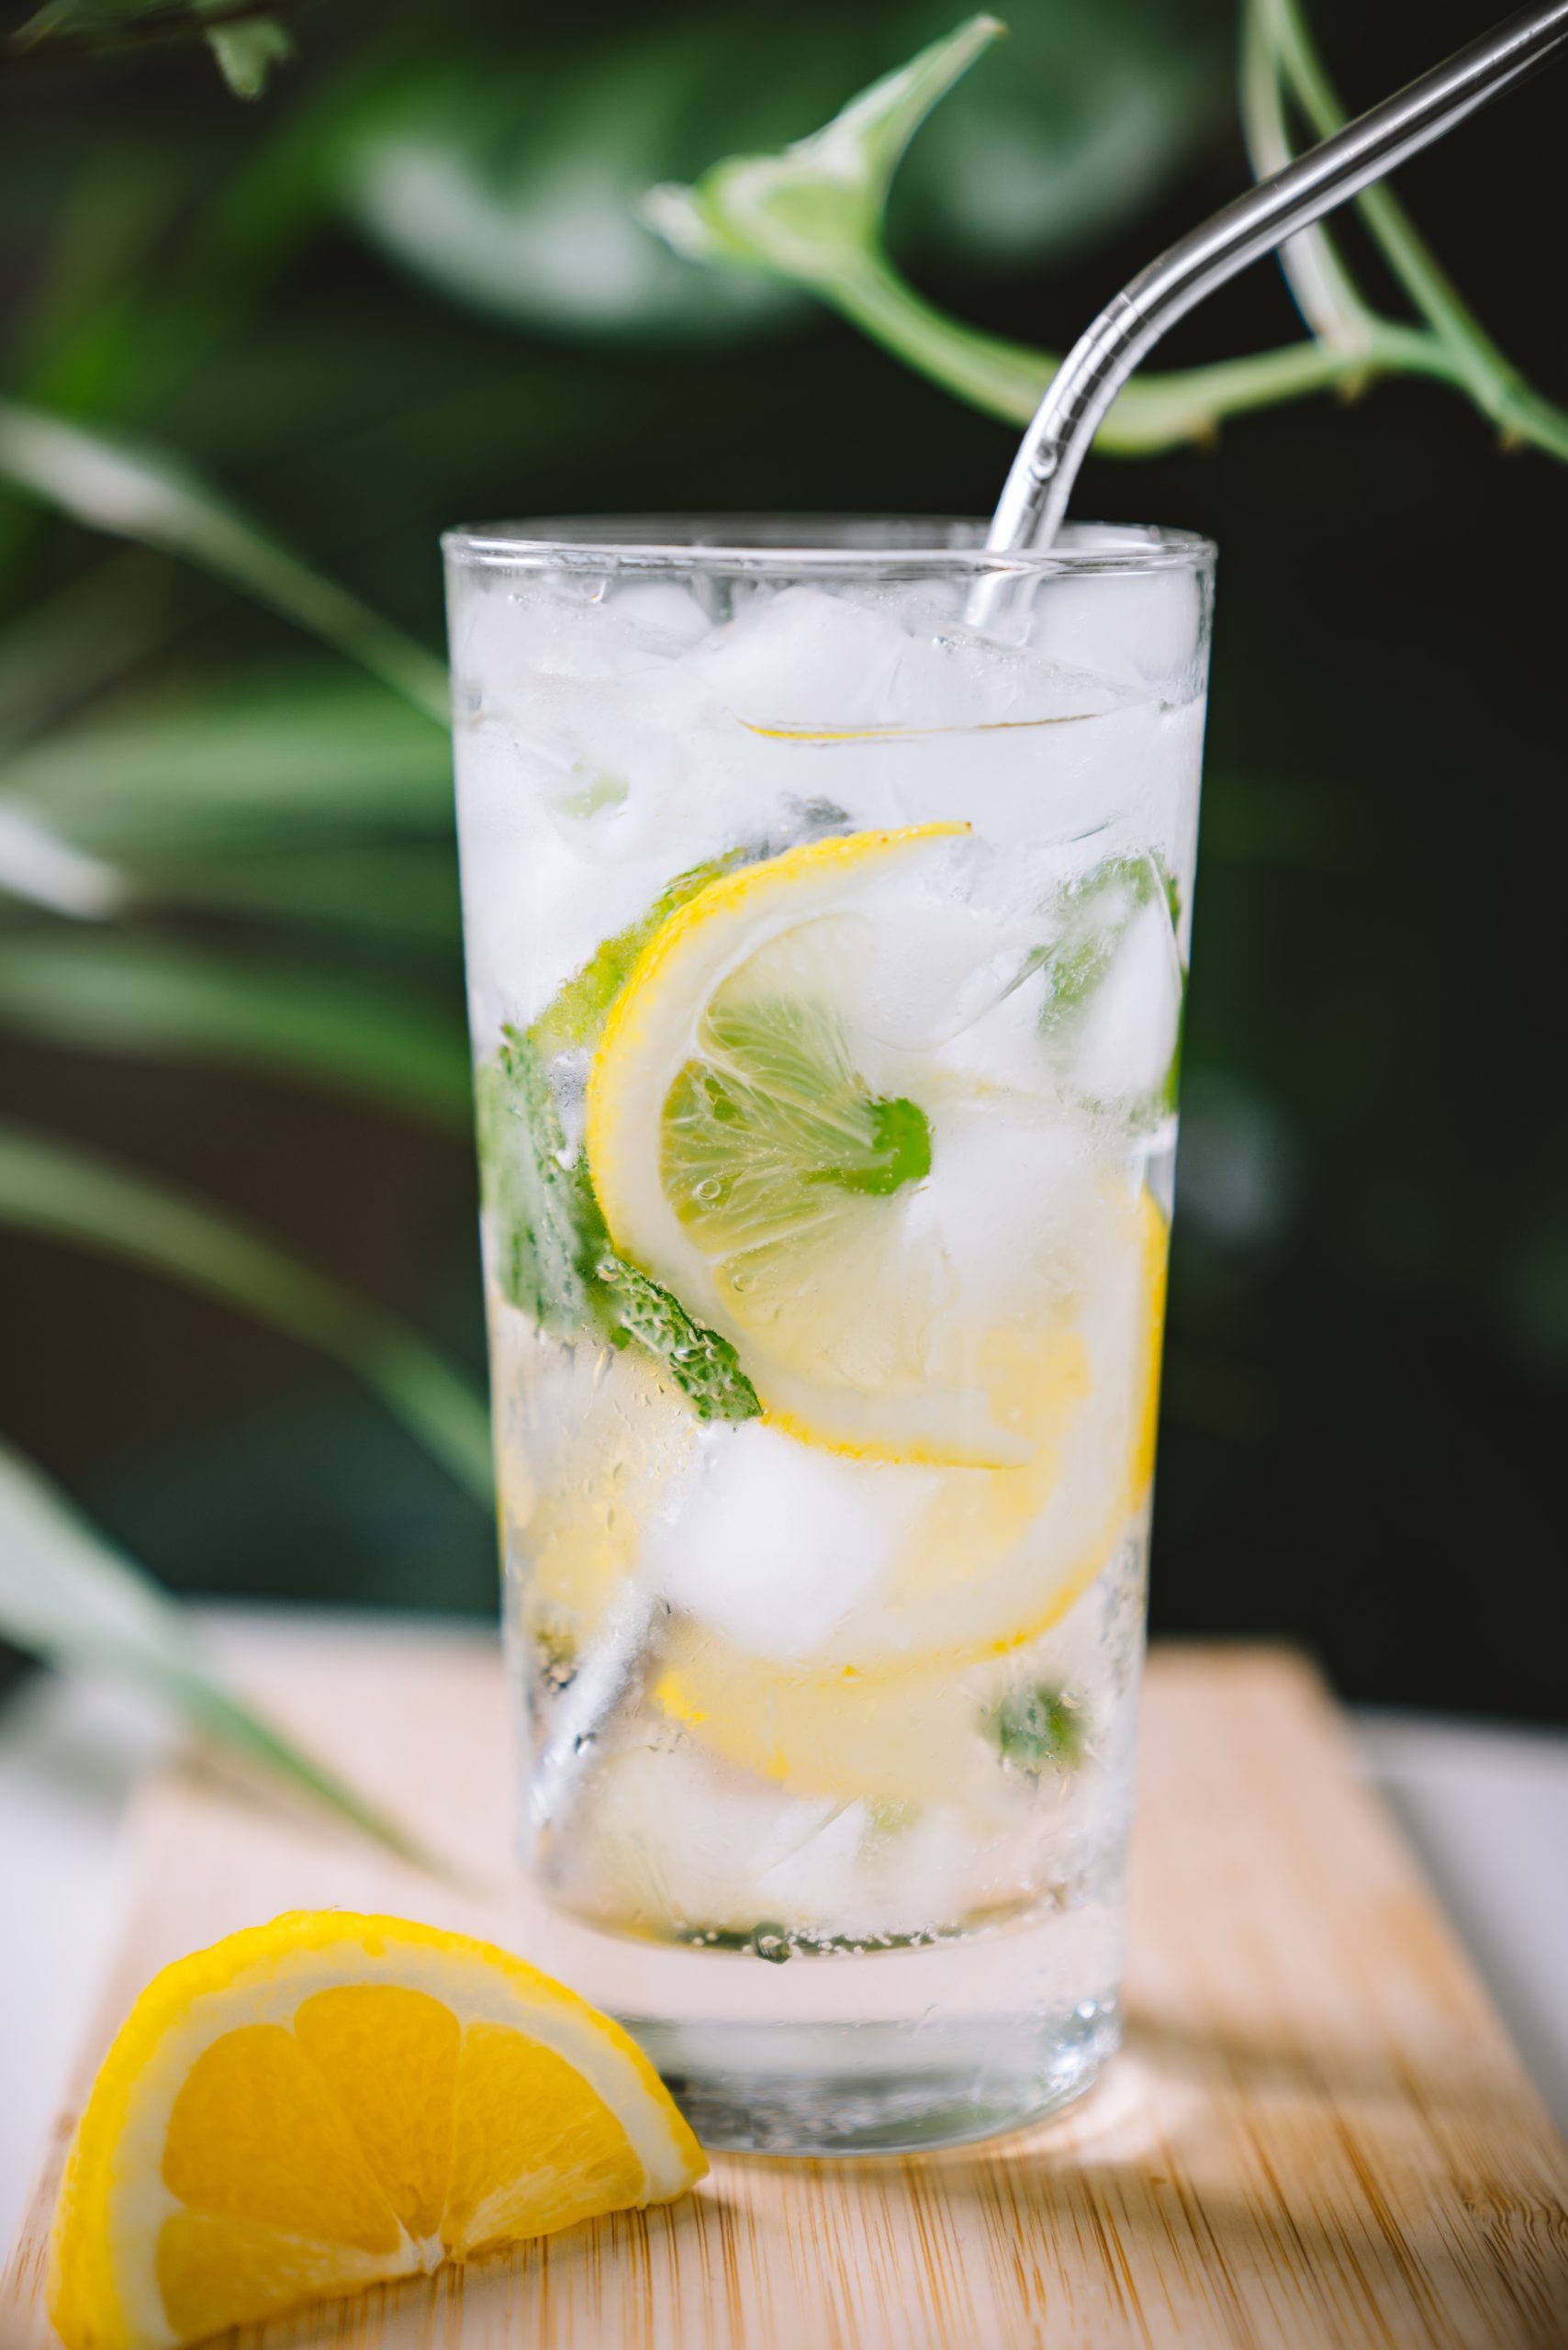 Summer Drink made with lemons